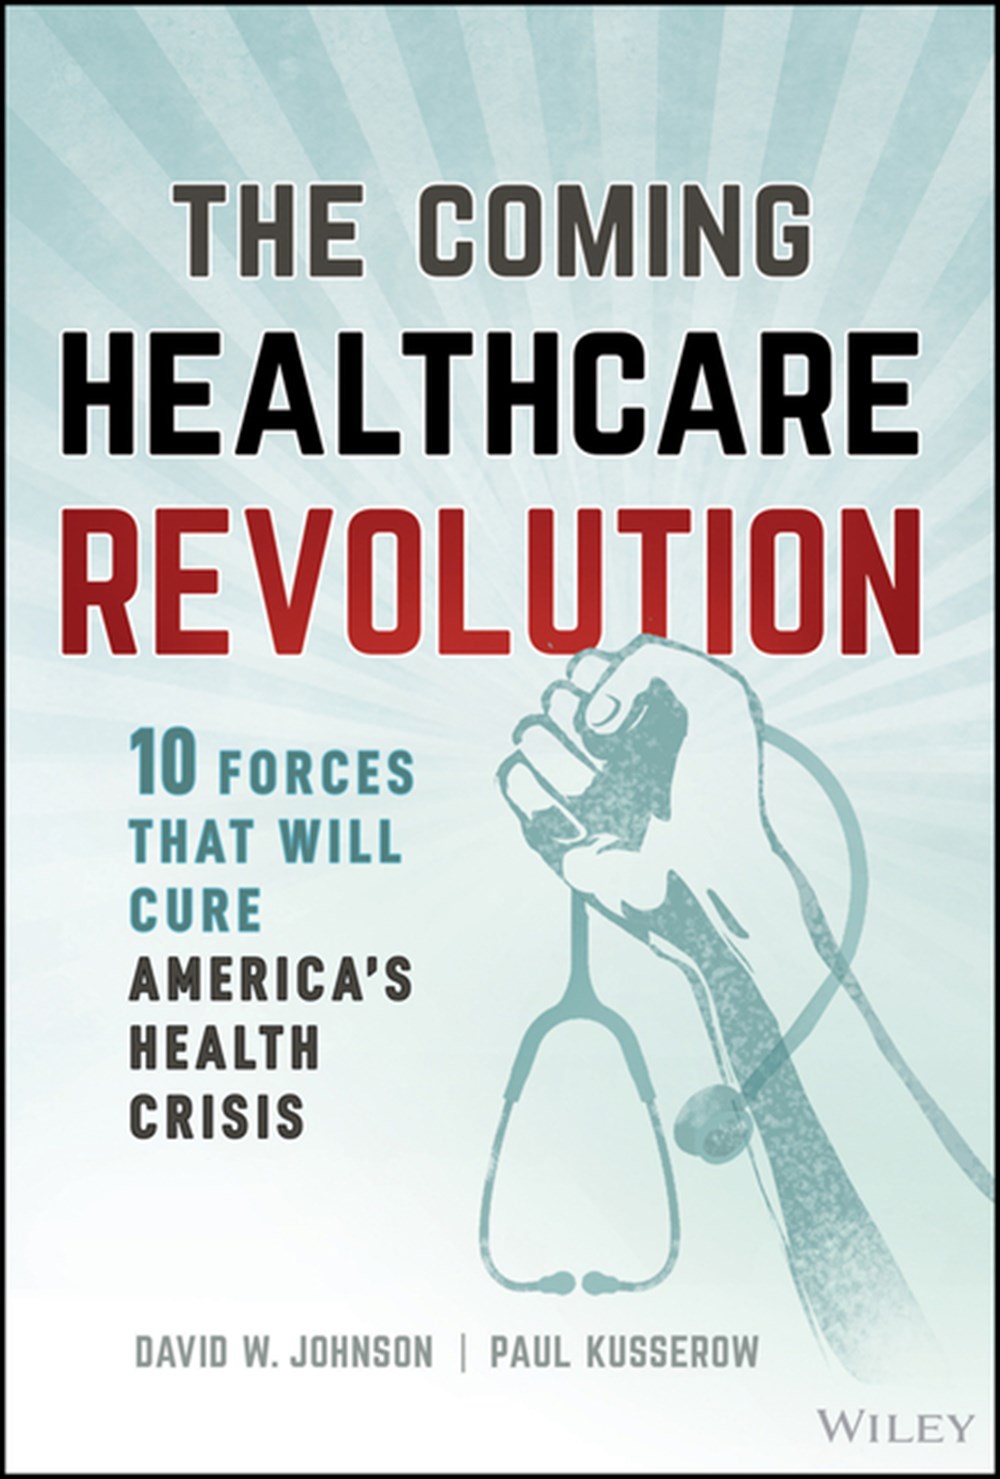 Coming Healthcare Revolution: 10 Forces That Will Cure America's Healthcare Crisis